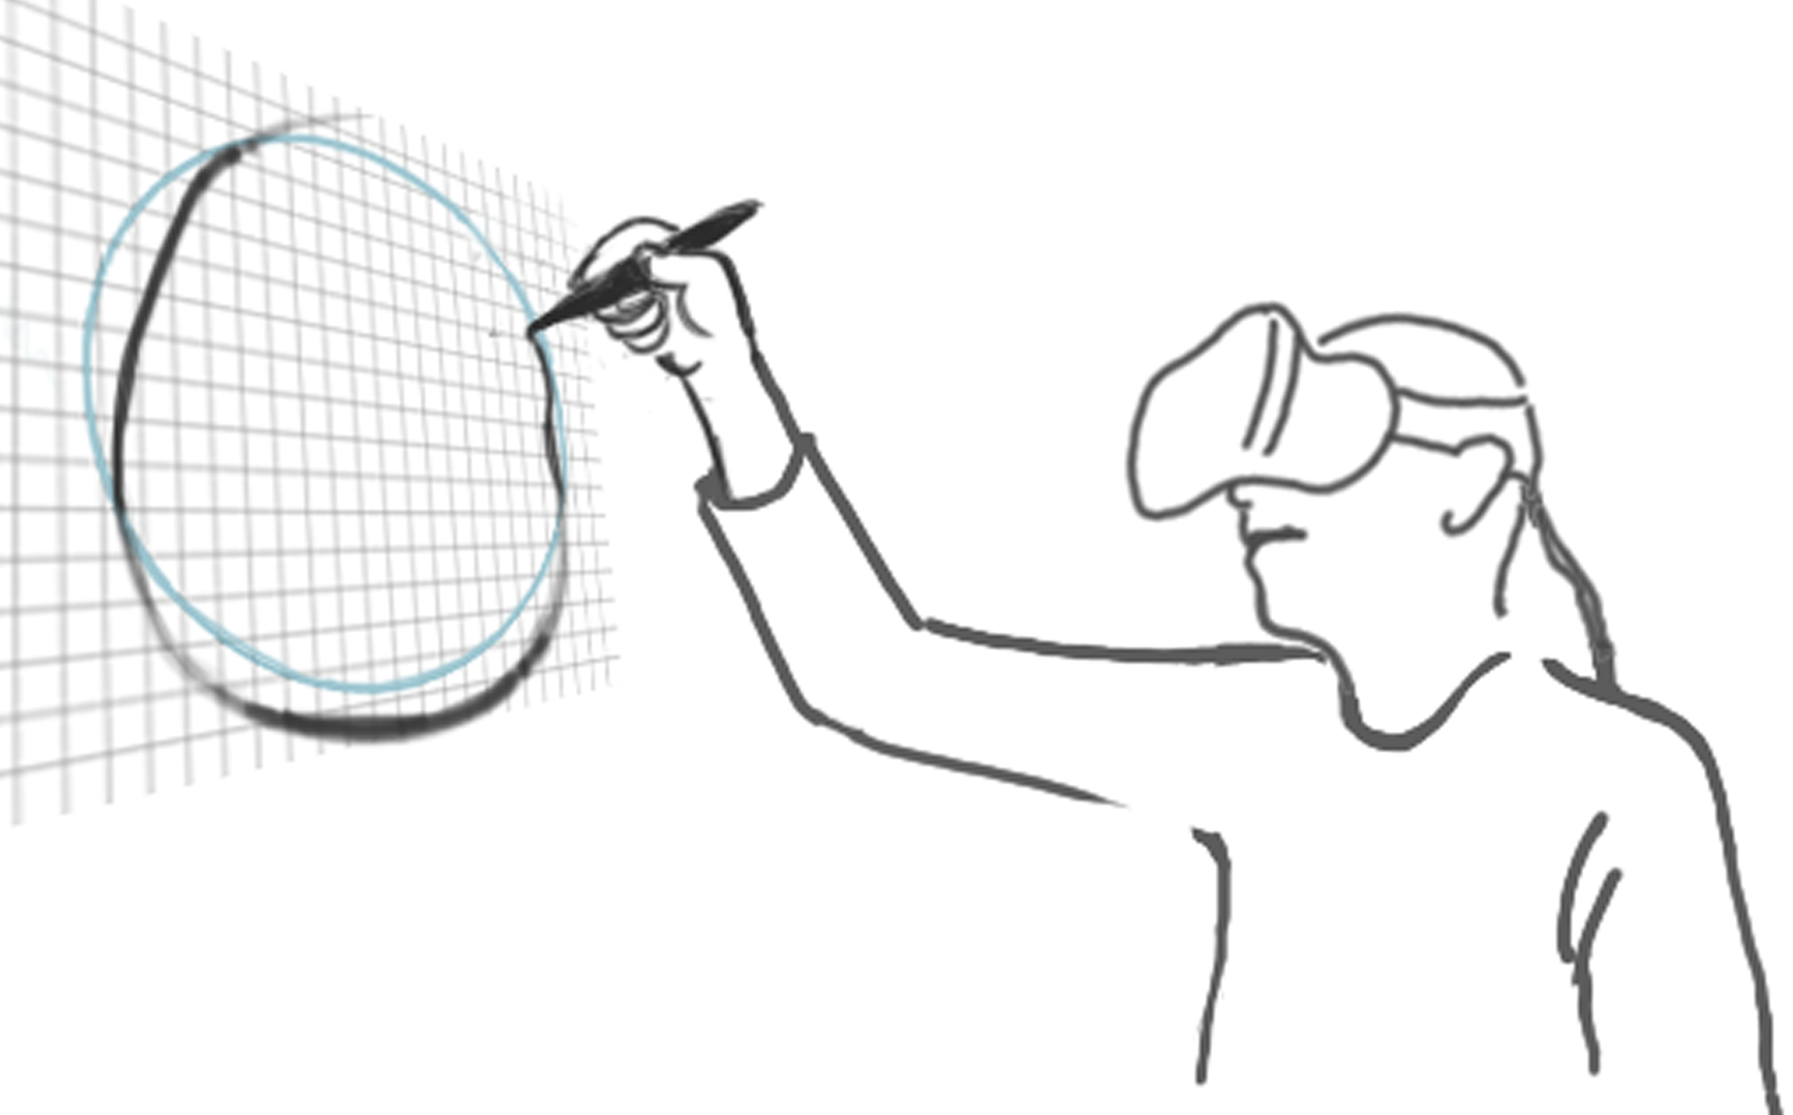 Thumbnail of Experimental Evaluation of Sketching on Surfaces in VR